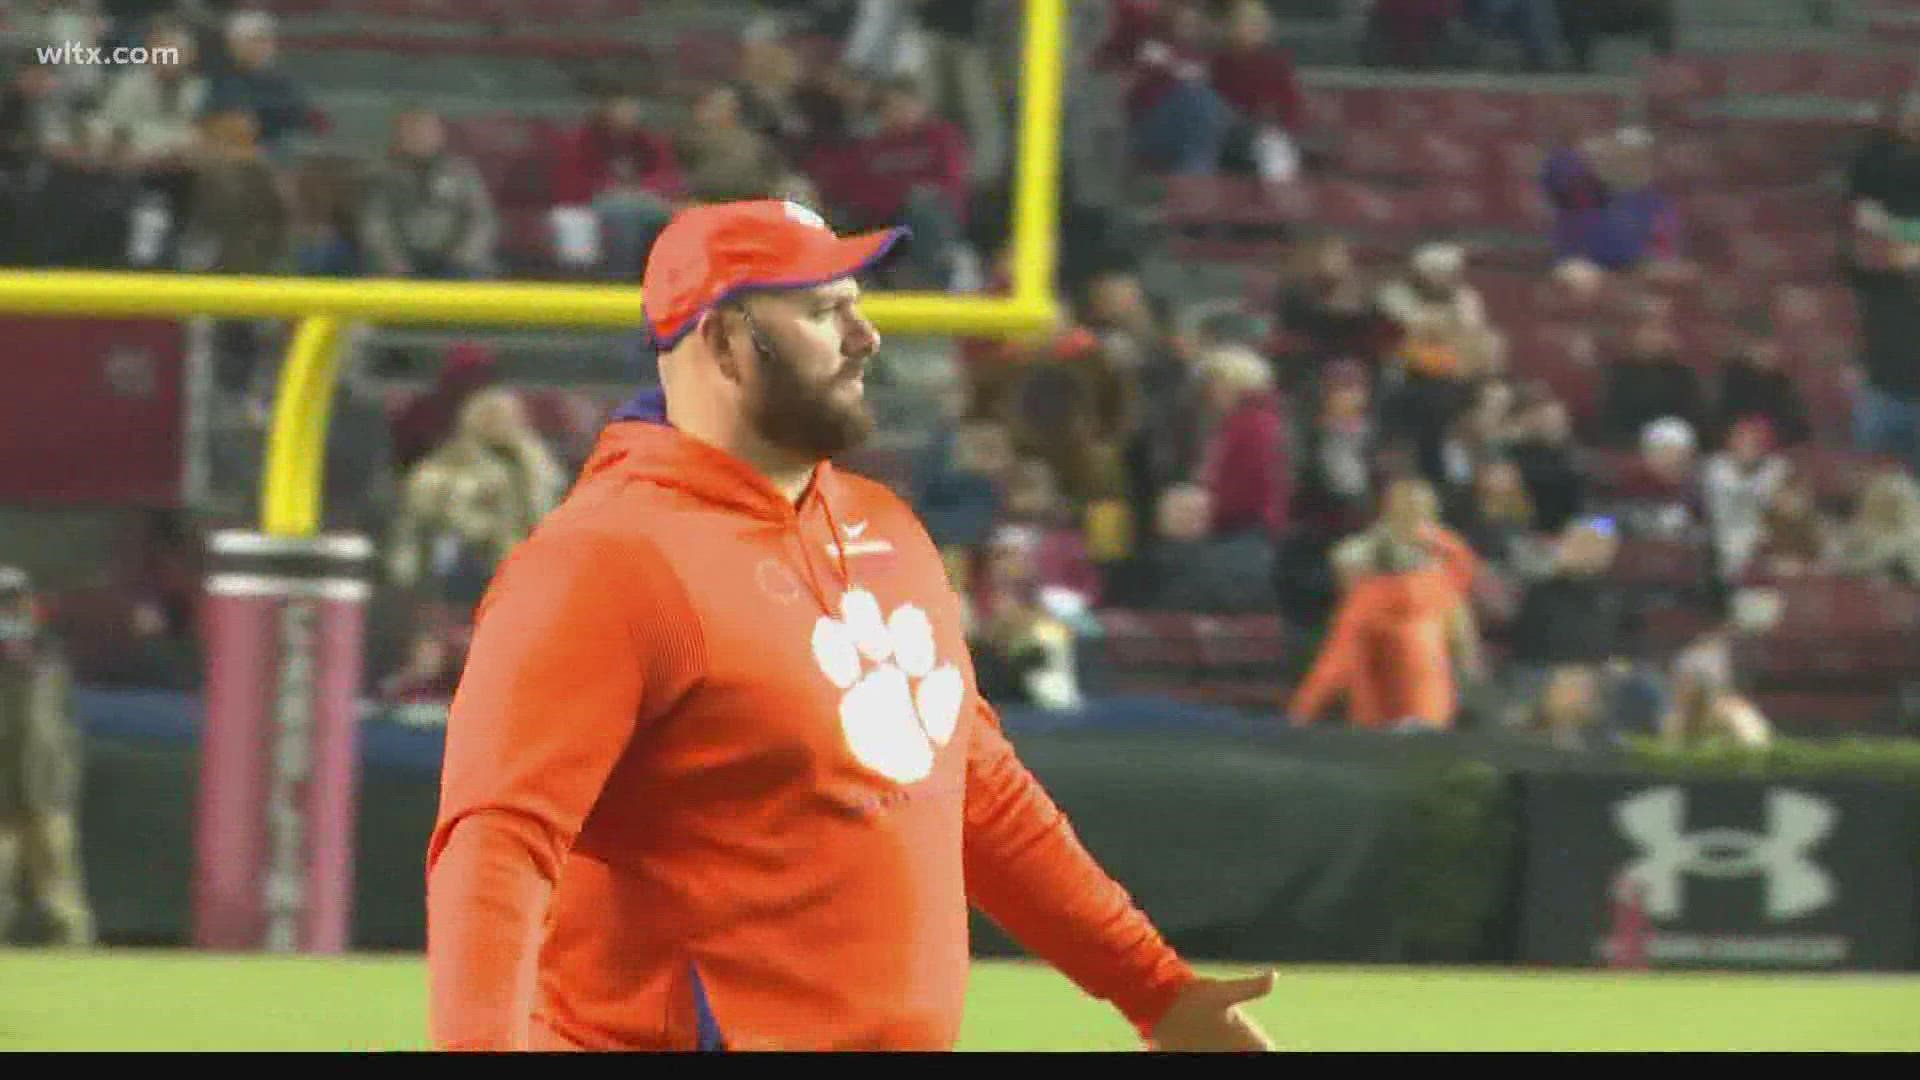 Thomas Austin is a Camden native and a former Clemson offensive lineman who is now in charge of that group on a full-time basis.